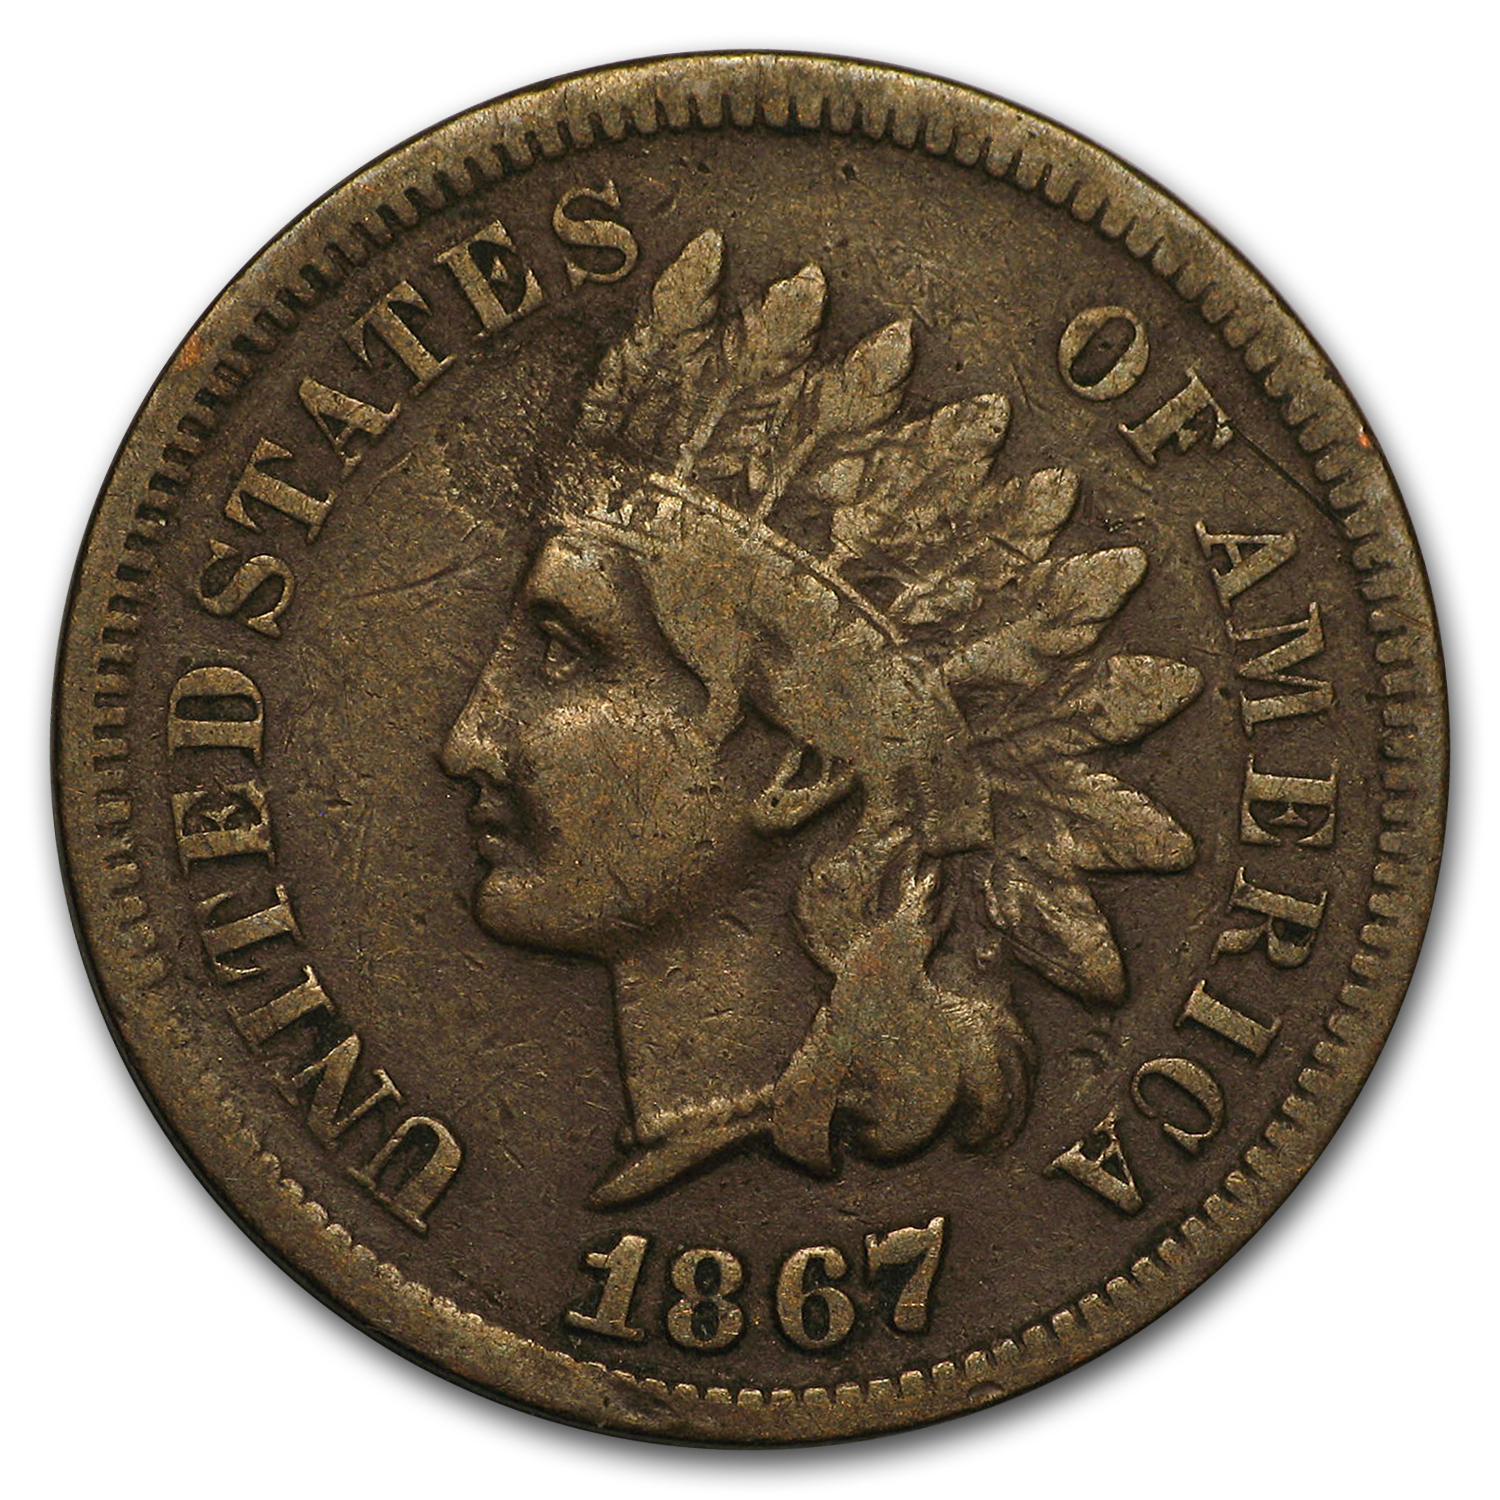 Buy 1867 Indian Head Cent VG